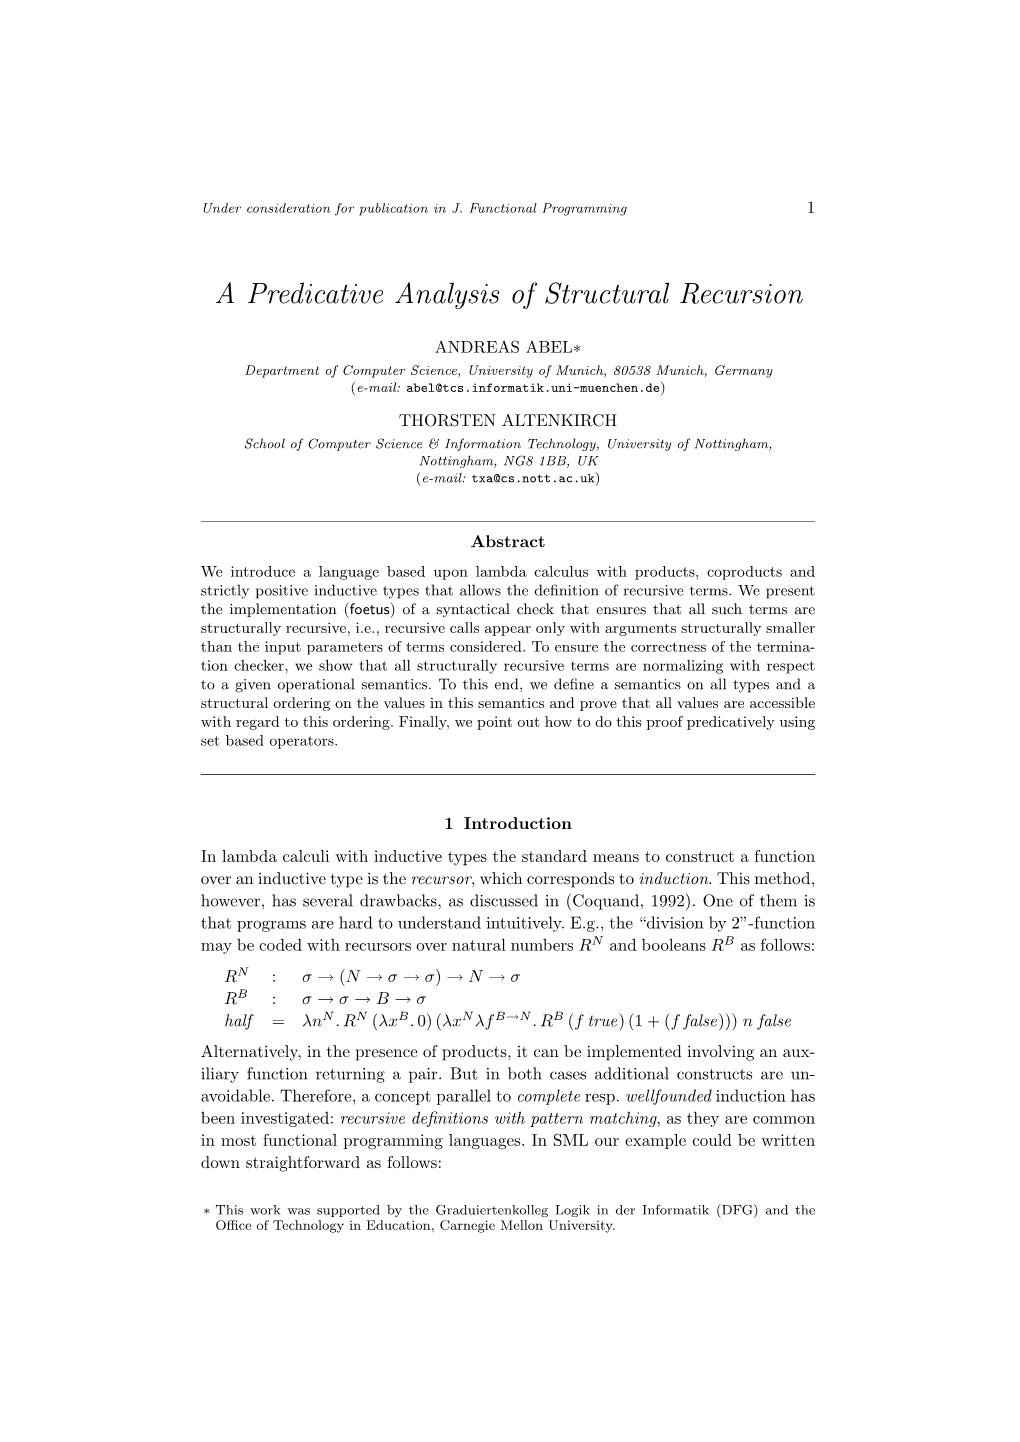 A Predicative Analysis of Structural Recursion